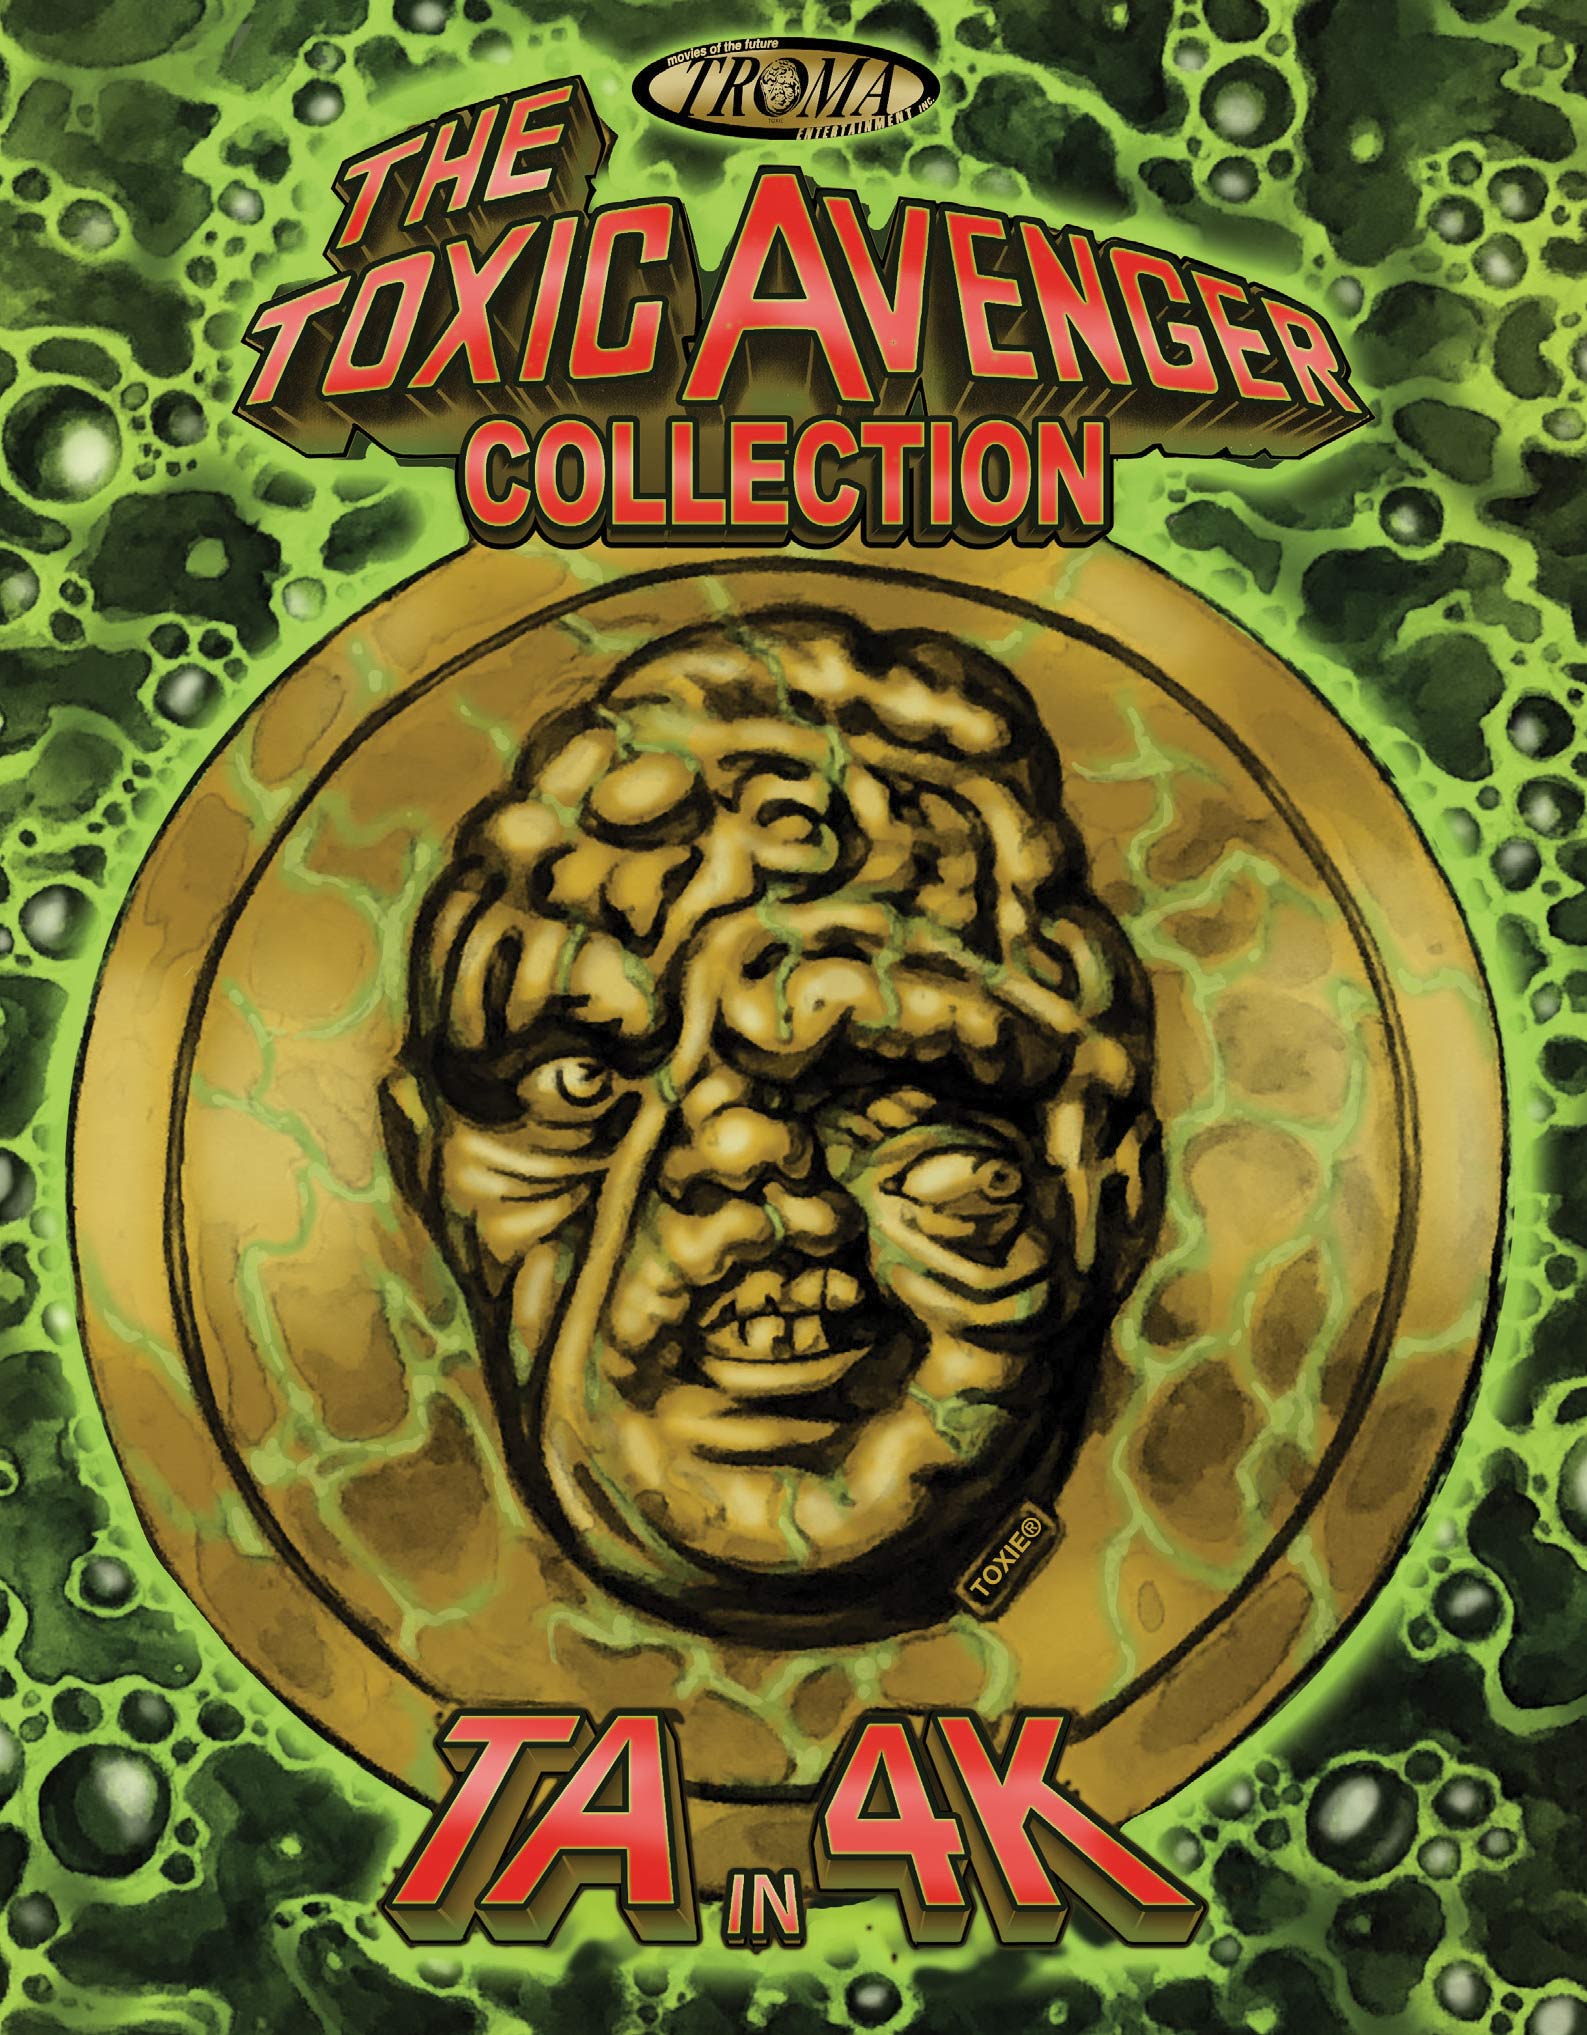 THE TOXIC AVENGER COLLECTION 4K UHD/BLU-RAY